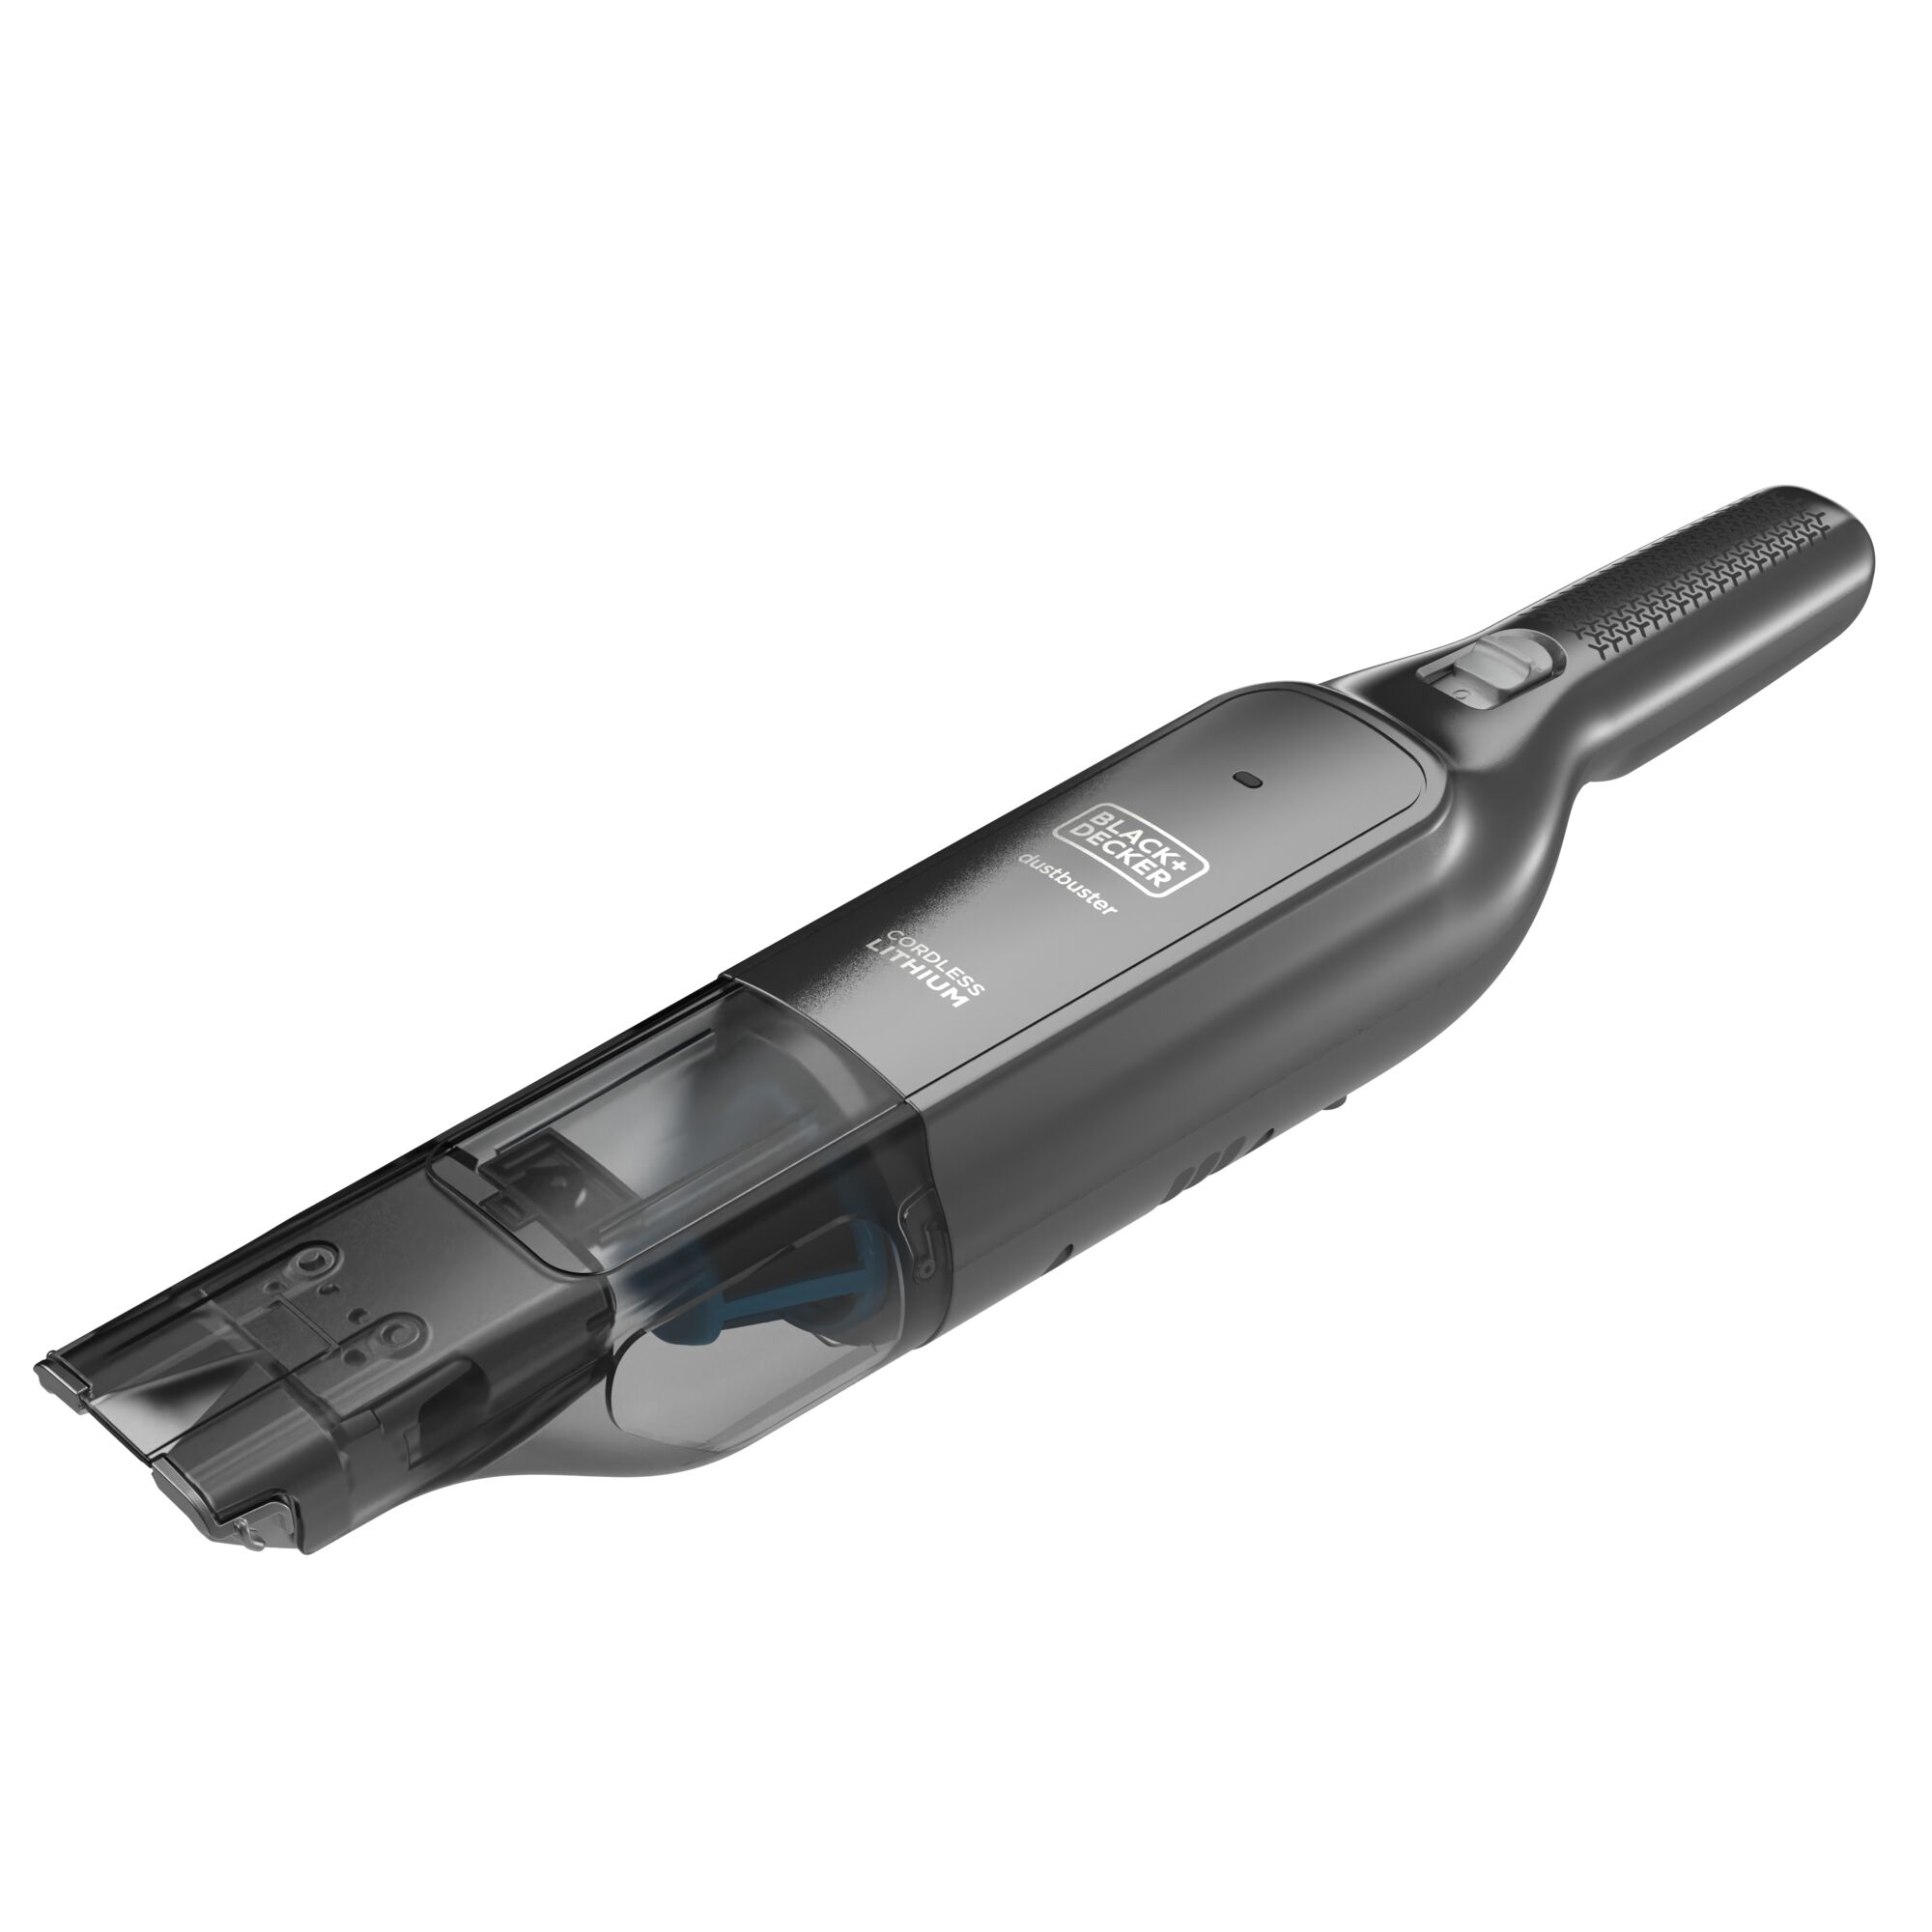 Profile of the 12 volt MAX Advanced Clean Cordless Hand Vacuum.